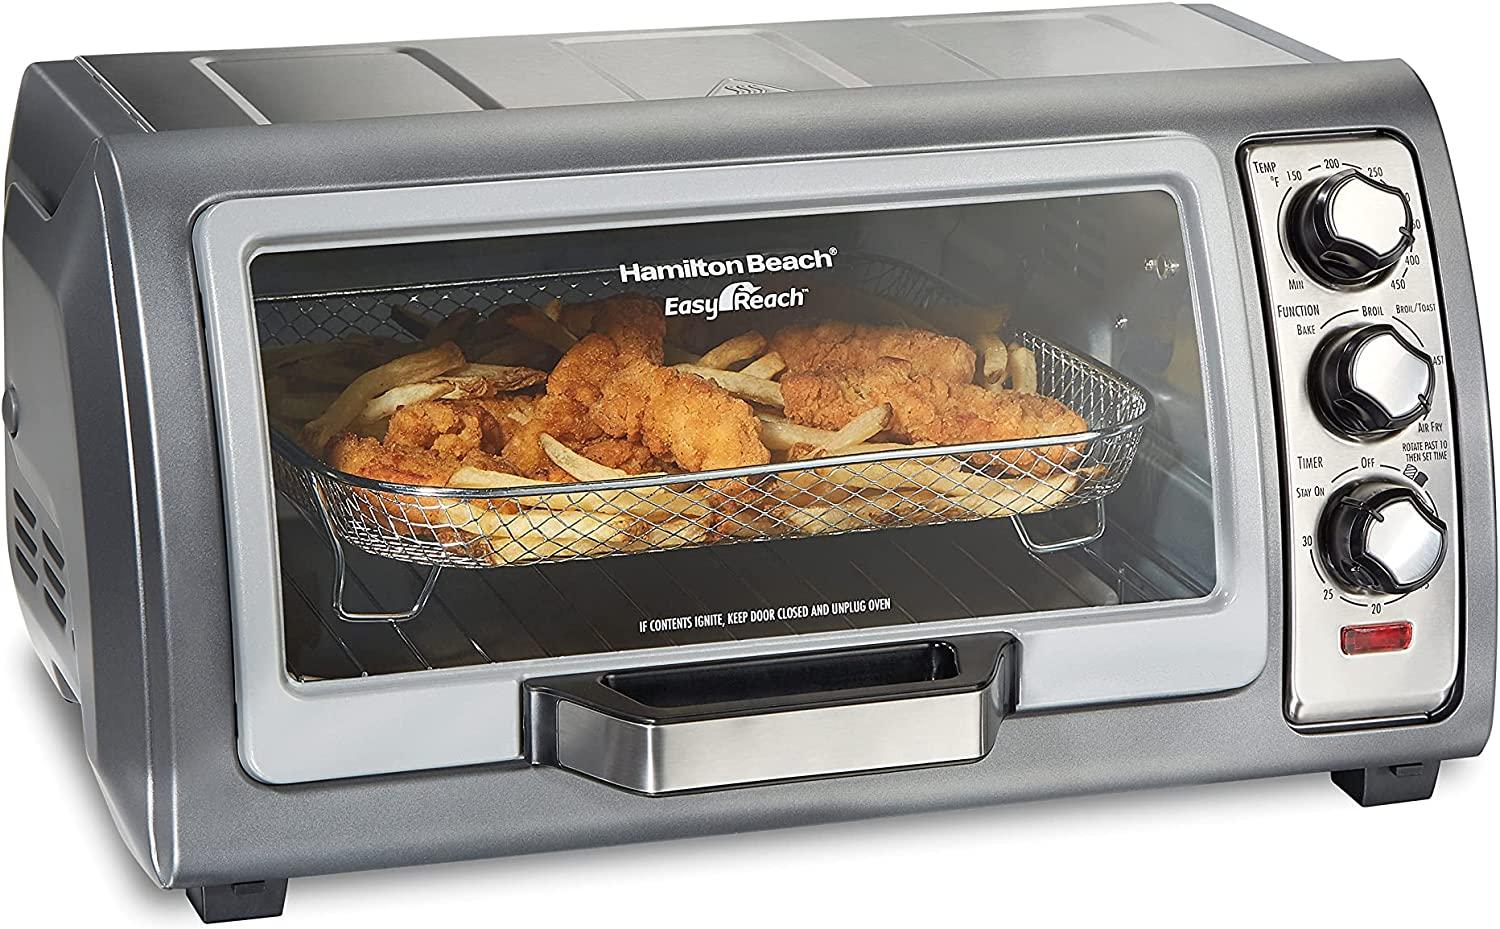 Hamilton Beach Sure-Crisp Stainless Steel Air Fryer Toaster Oven for $49 Shipped